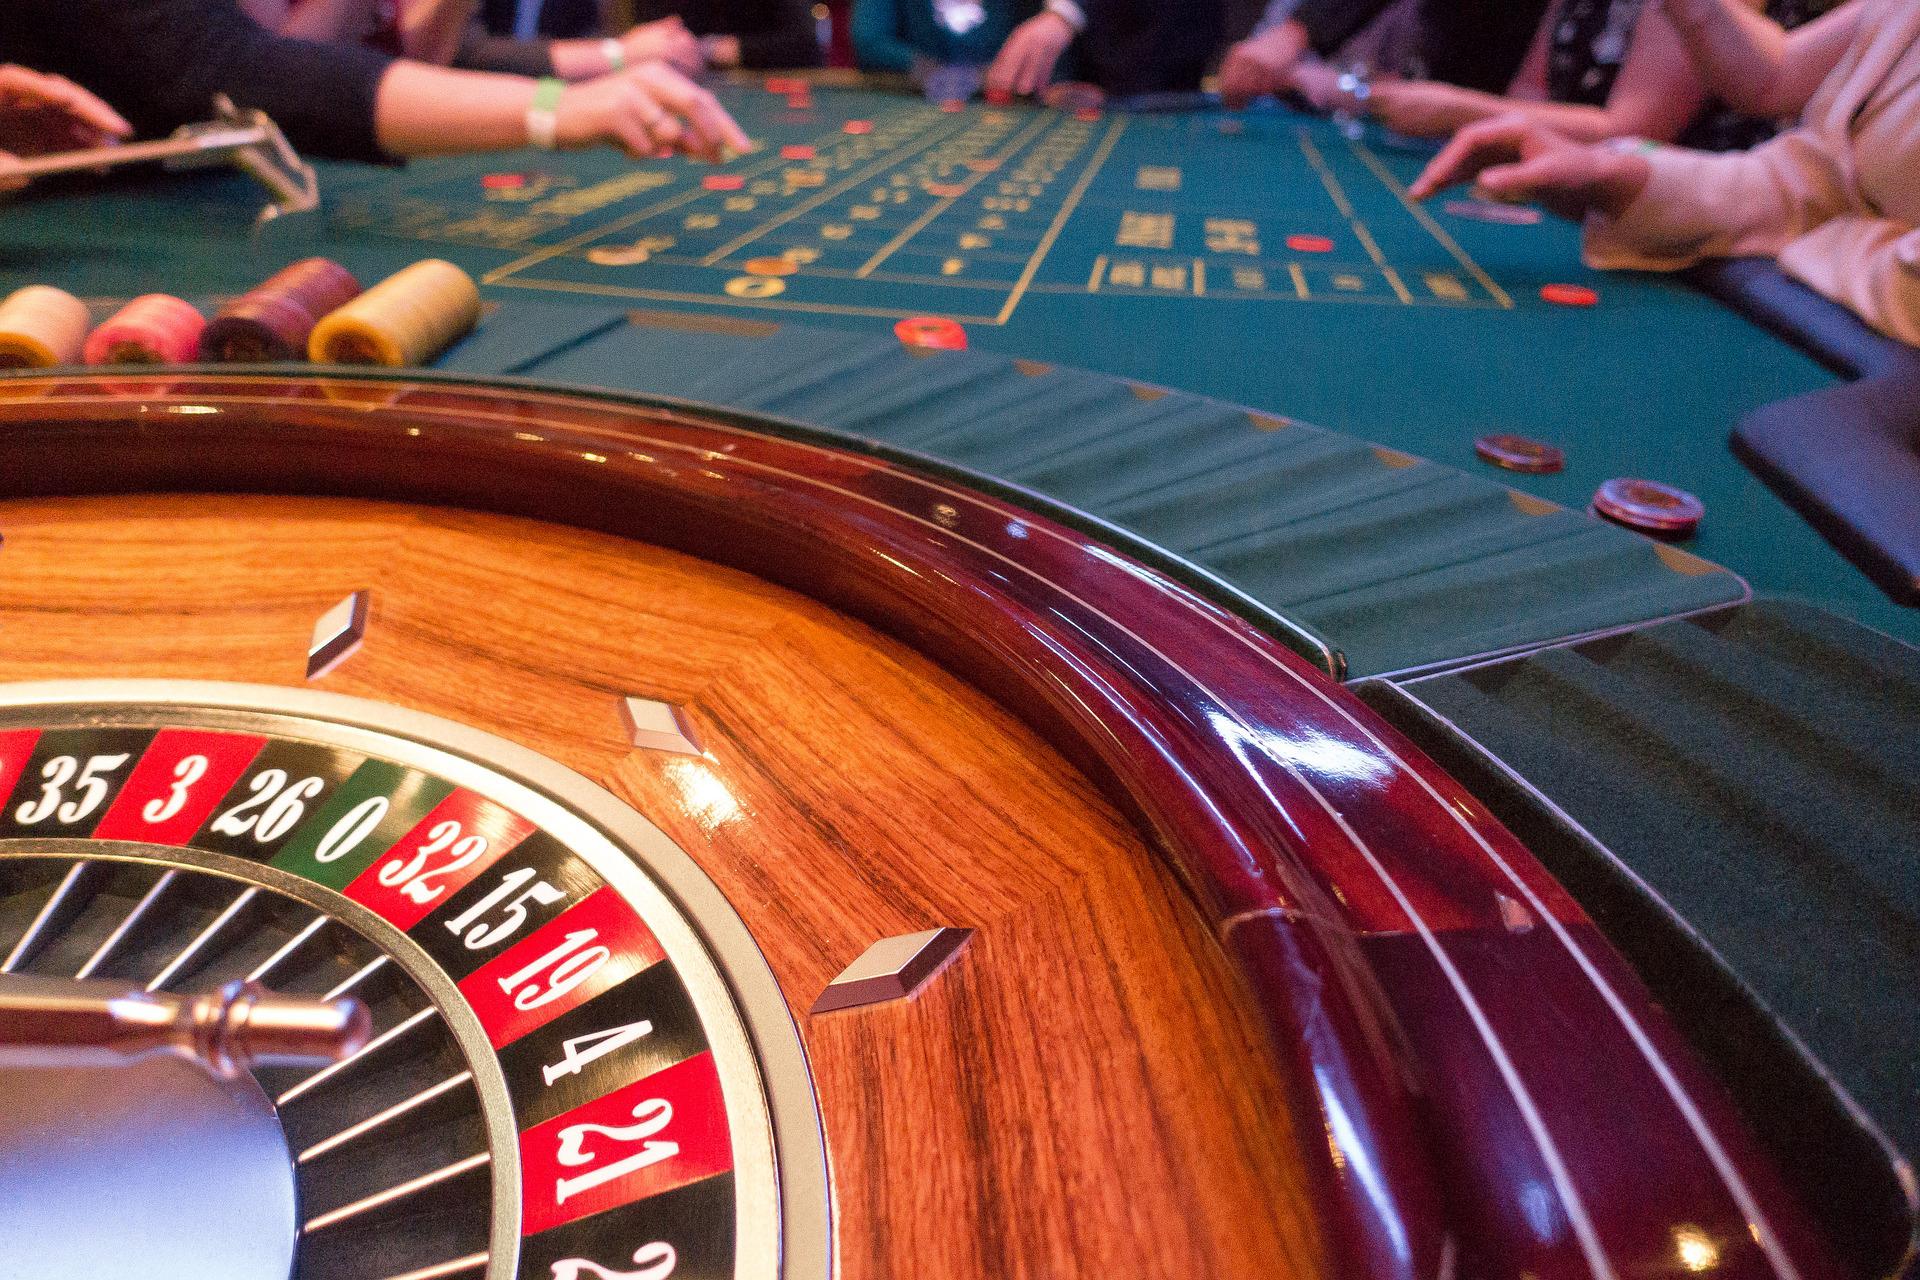 5 WAYS TO ENSURE YOUR DIGITAL SAFETY WHEN PLAYING ONLINE CASINO GAMES